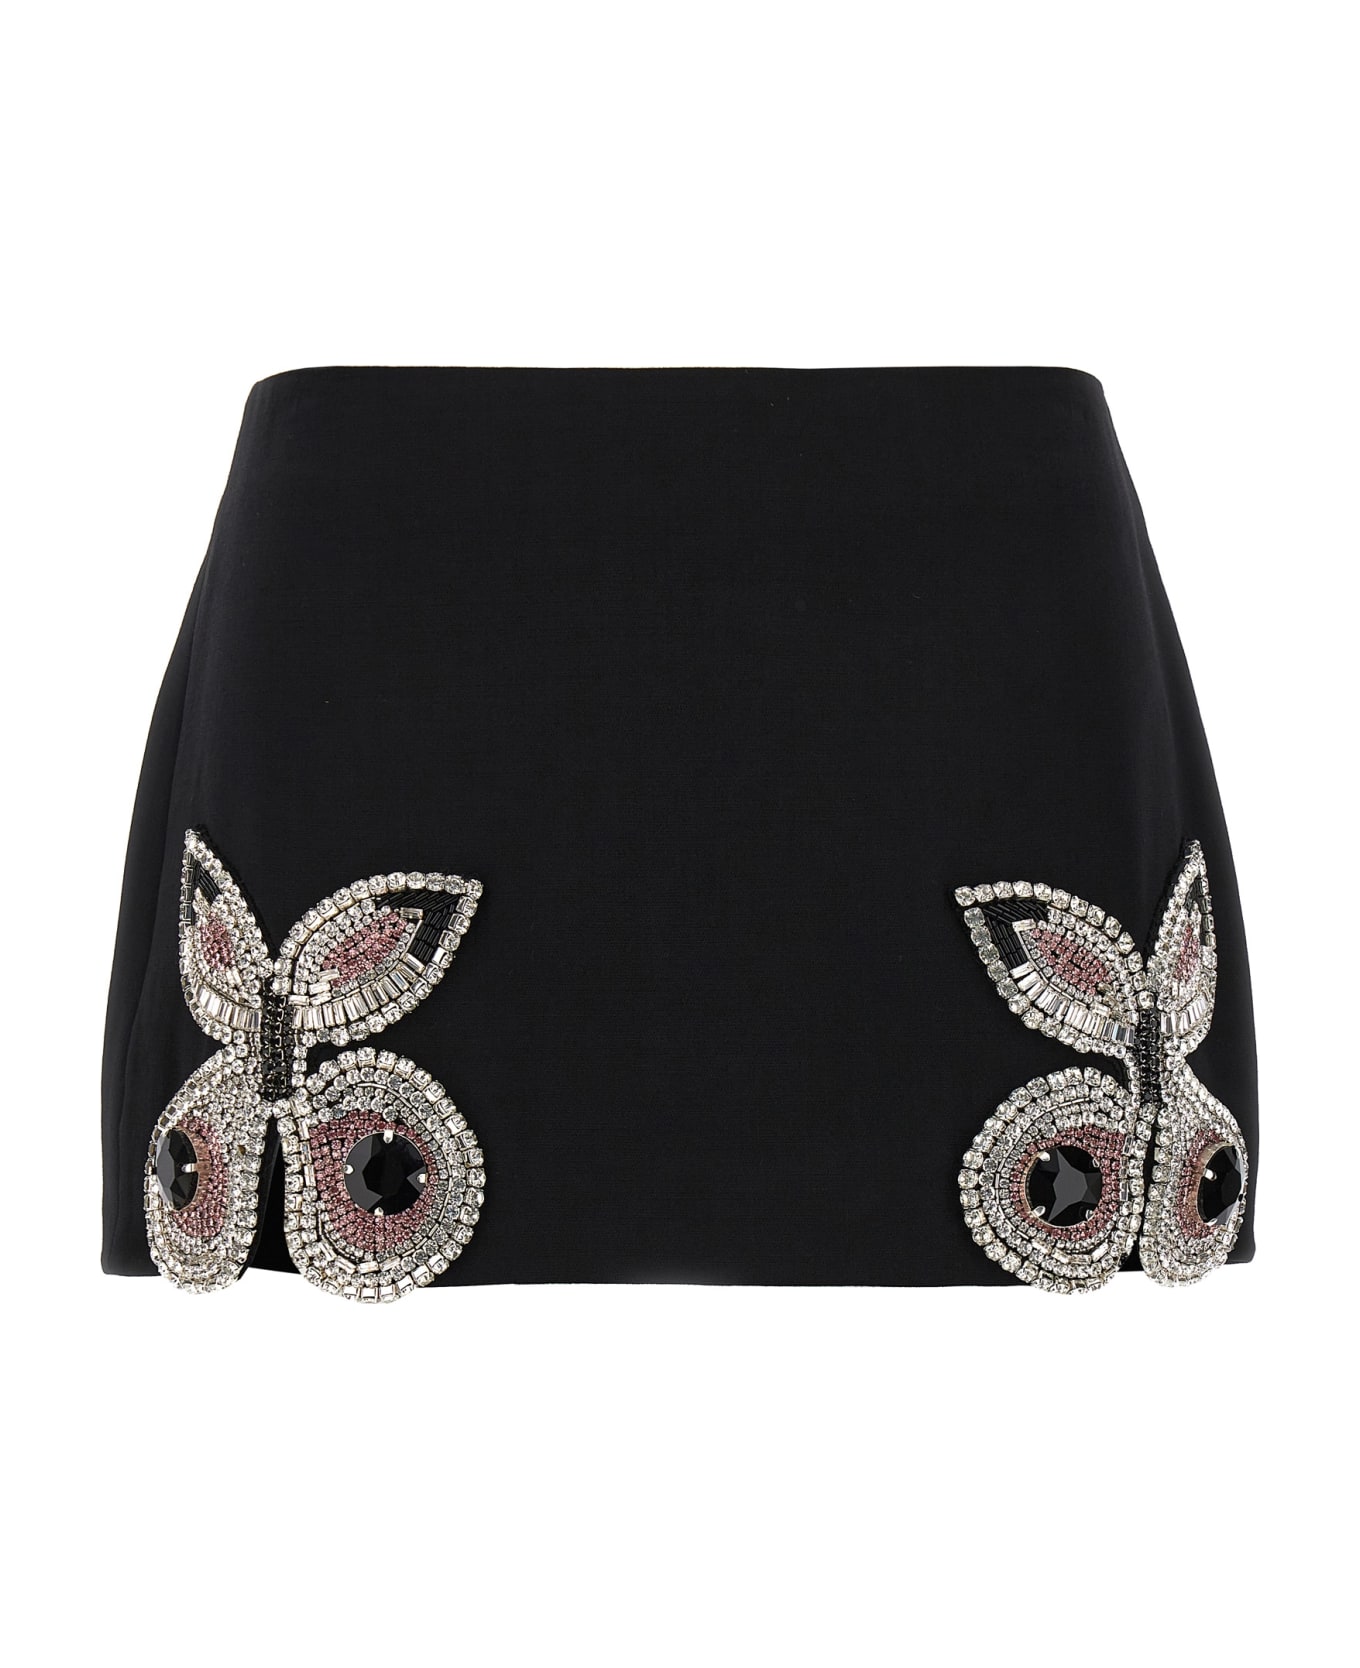 AREA 'embroidered Butterfly Mini' Skirt - Black  